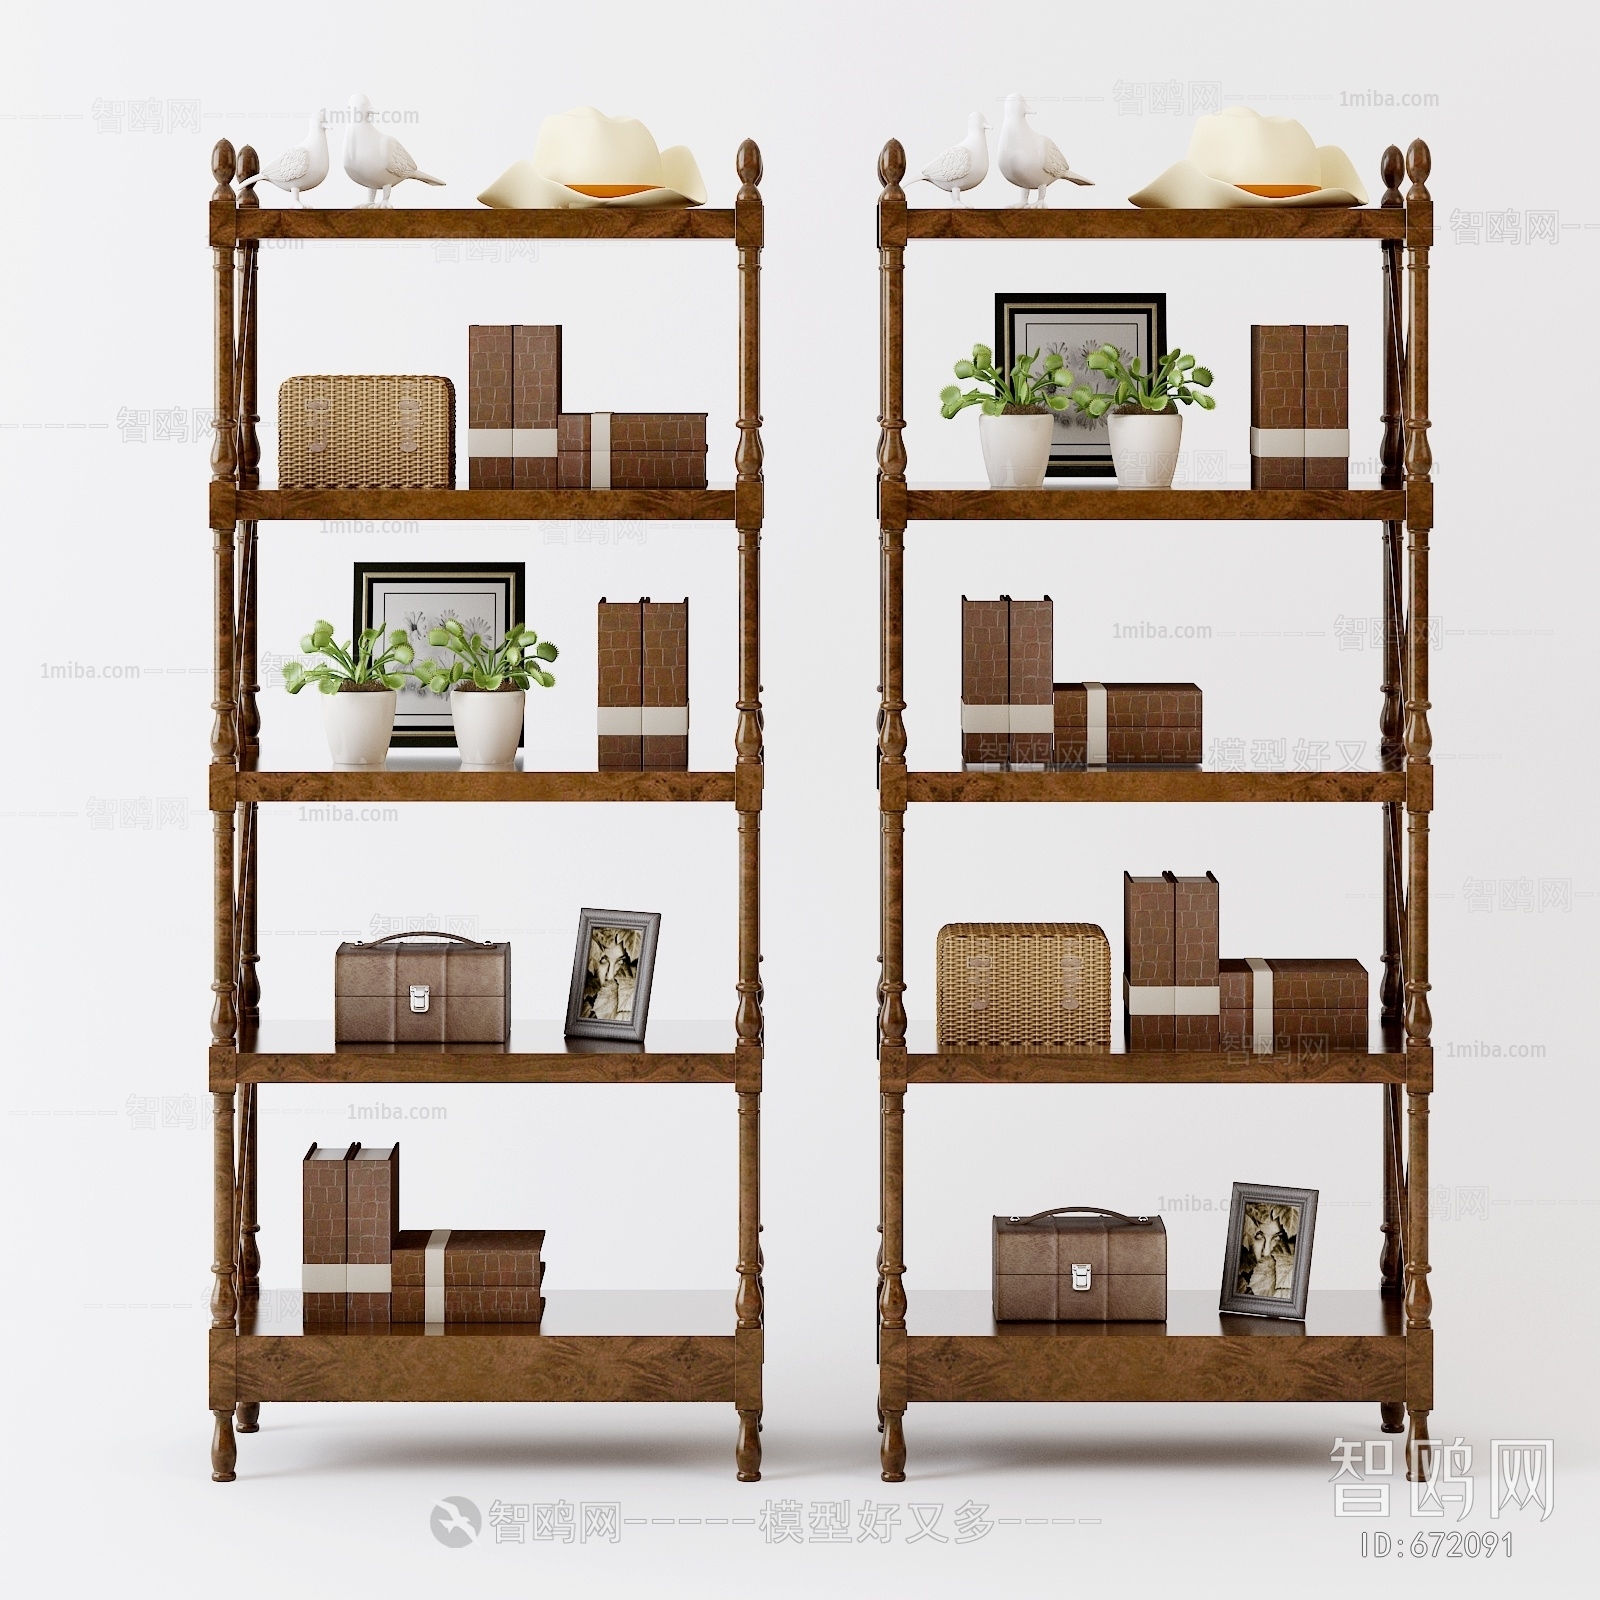 Classical Style Shelving